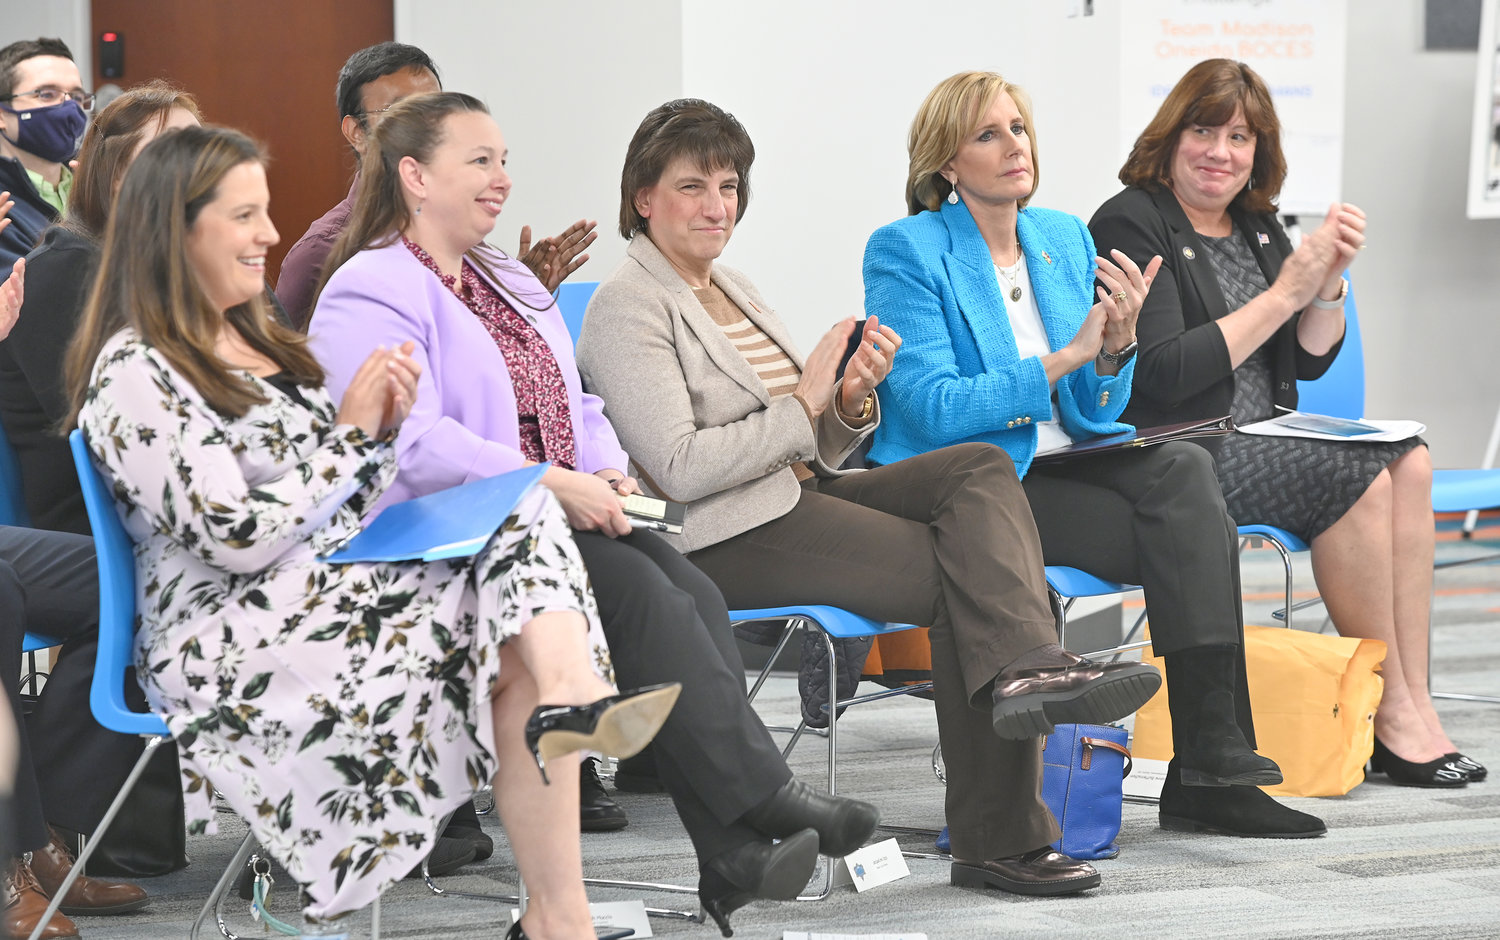 SPECIAL GUESTS — Applauding students during Friday’s AFRL Challenge event were, from left: Rep. Elise Stefanik; Sarah Muccio; Rome Mayor Jacqueline Izzo; Rep. Claudia Tenney; and Assemblywoman Marianne Buttenschon. Student photos online at www.romesentinel.com.